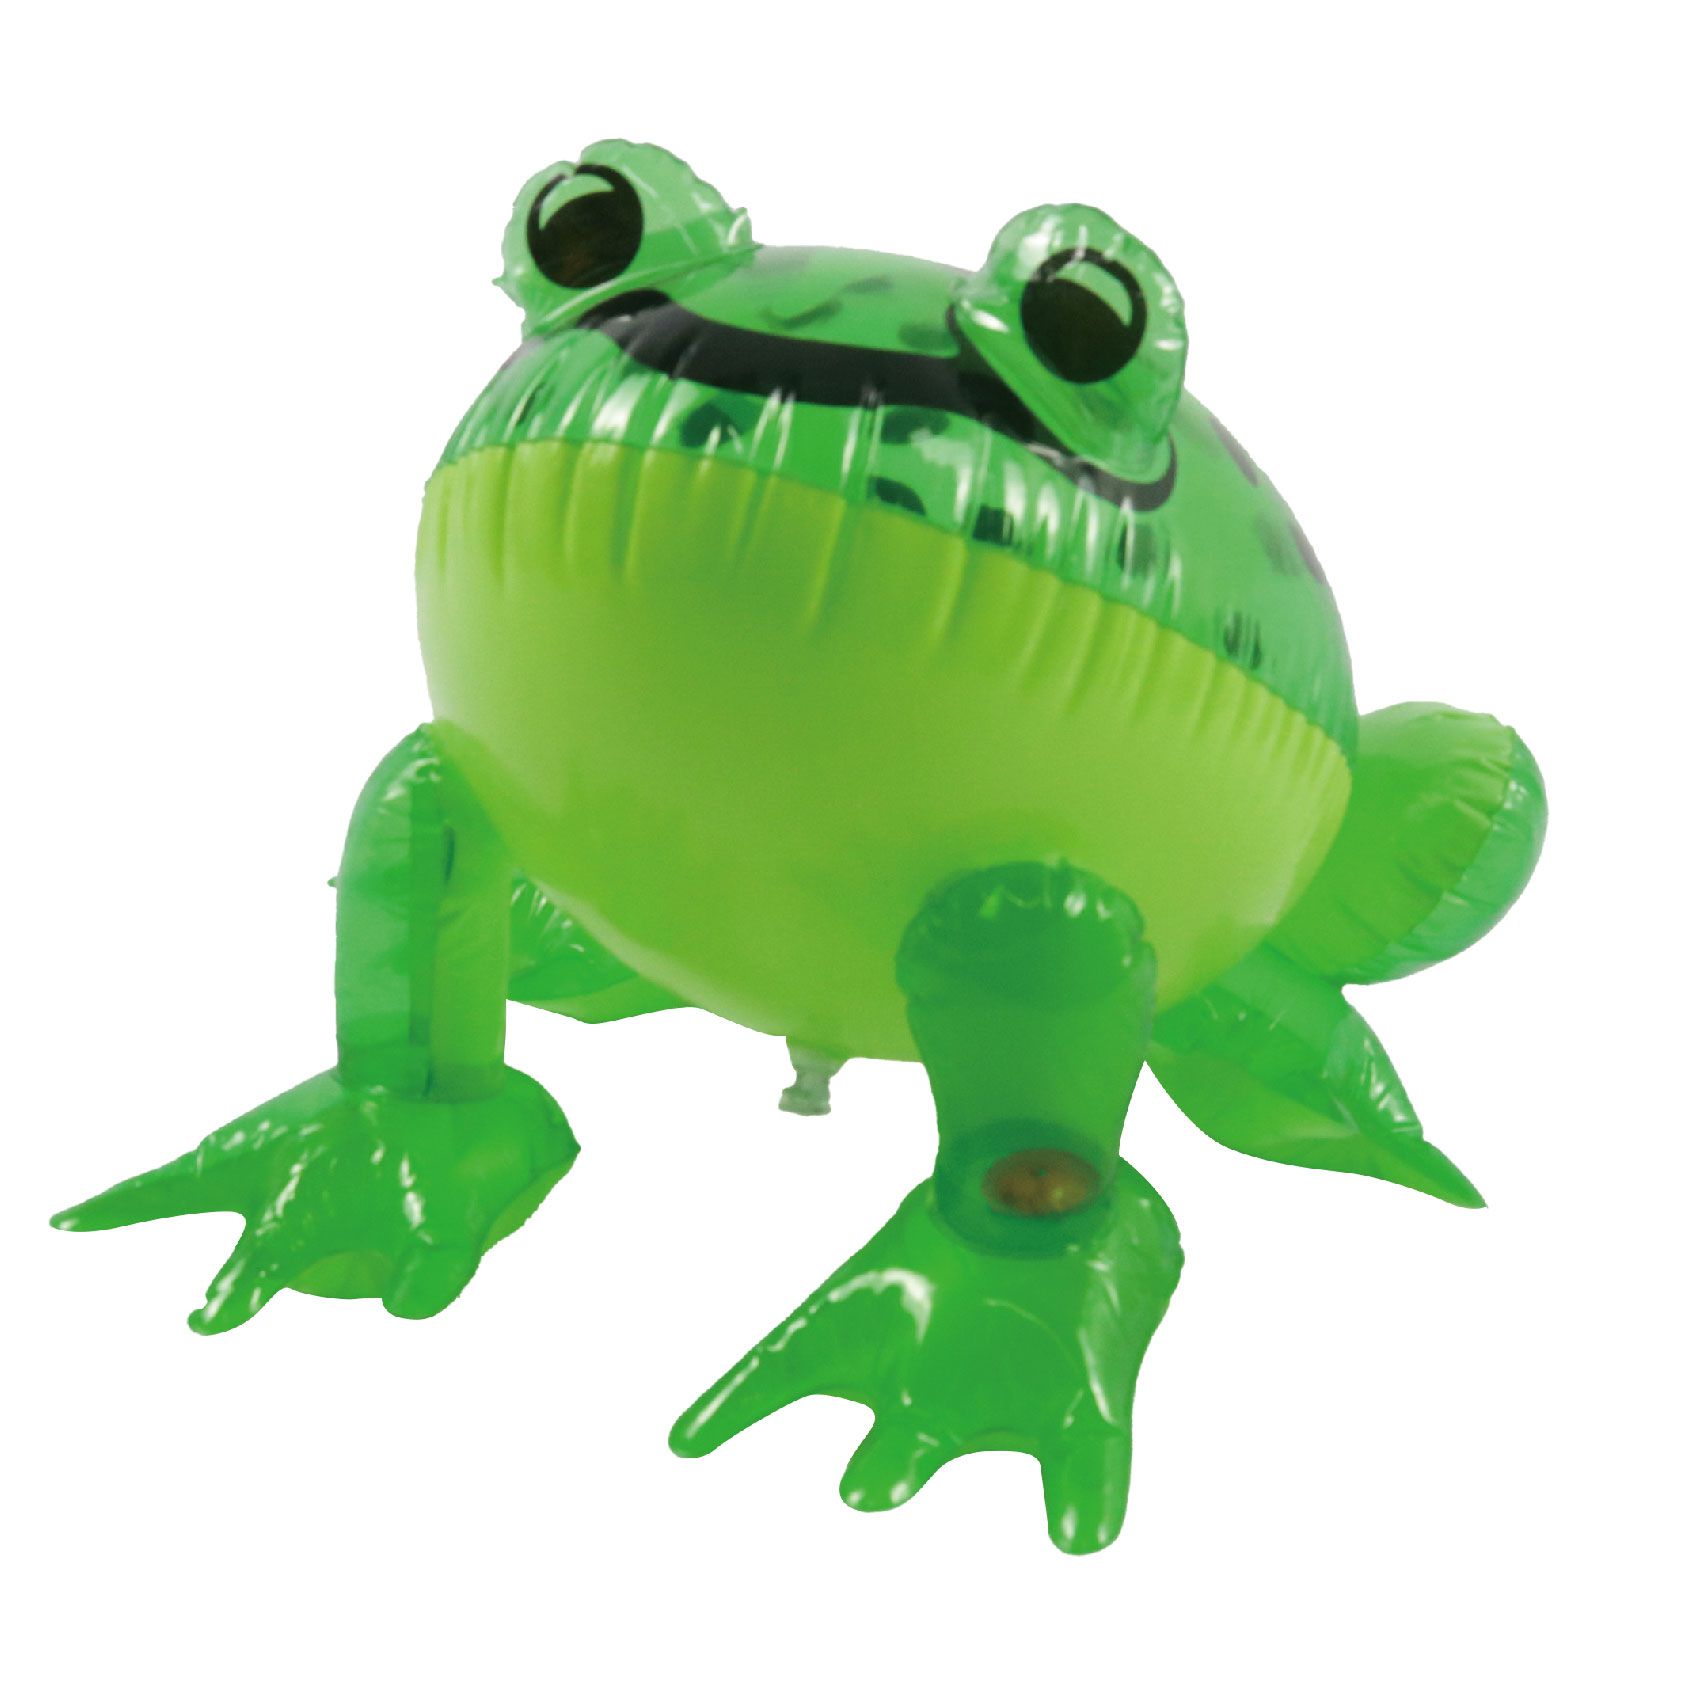 Cute And Funny Inflatable Frog